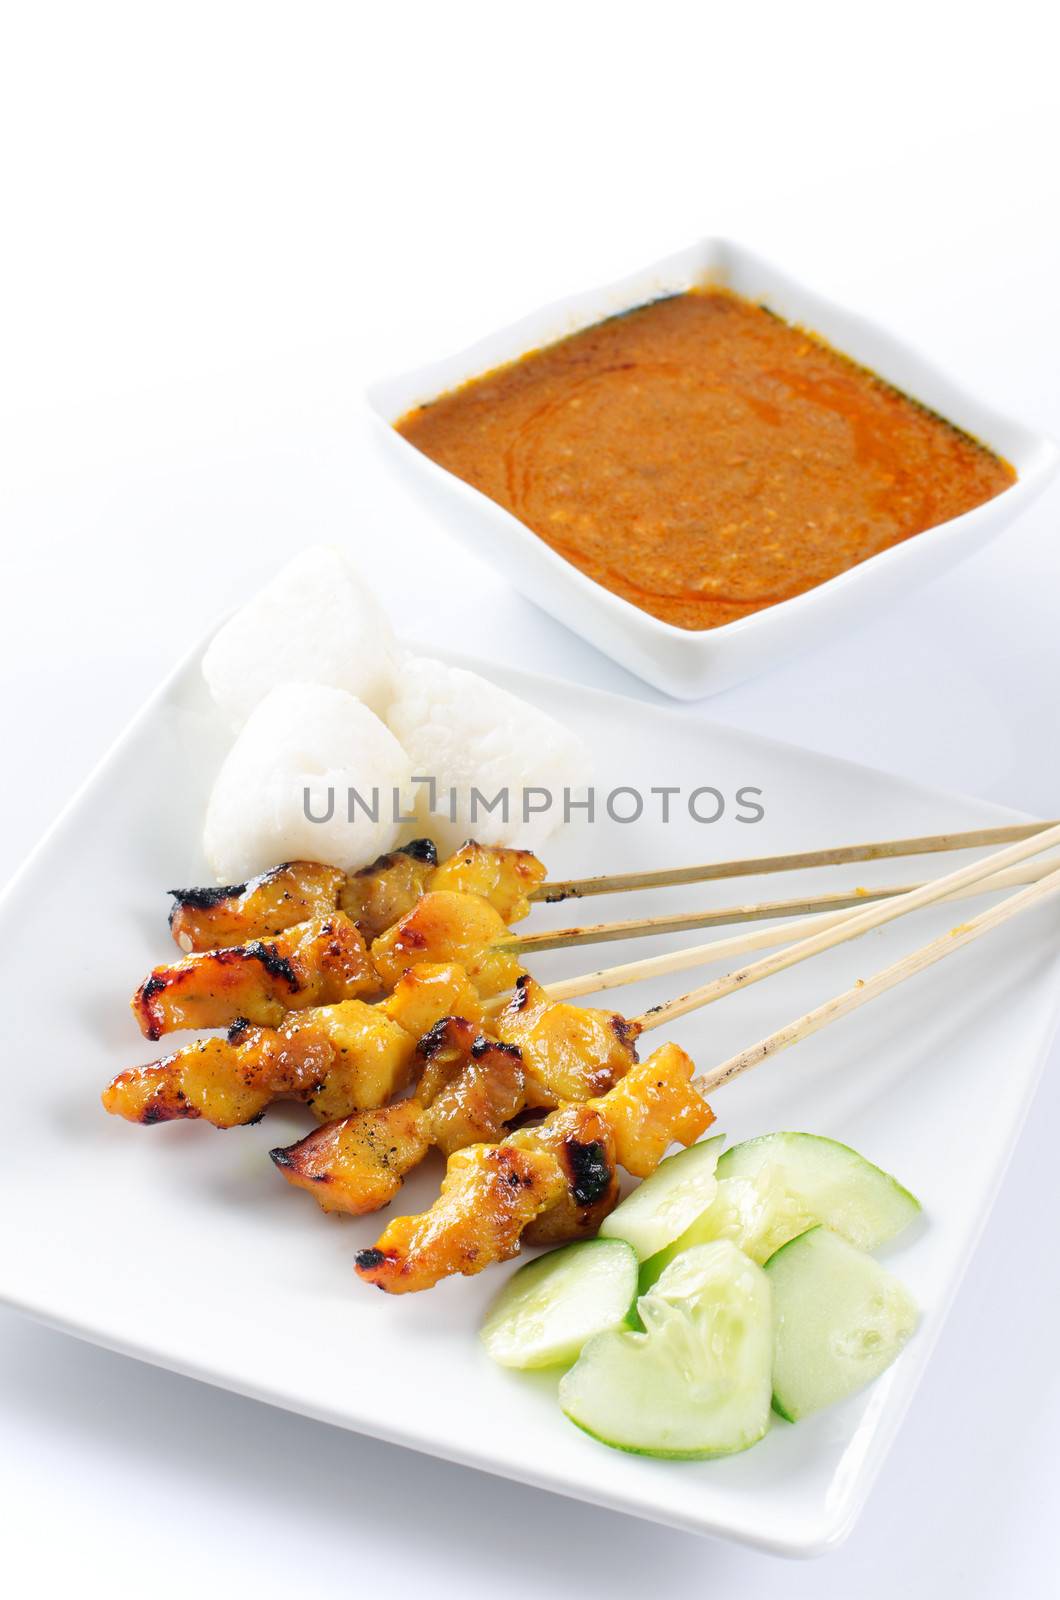 Chicken satay, skewered and grilled meat, served with peanut sauce, cucumber and ketupat. Traditional Malay food. Delicious hot and spicy Malaysian dish, Asian cuisine.